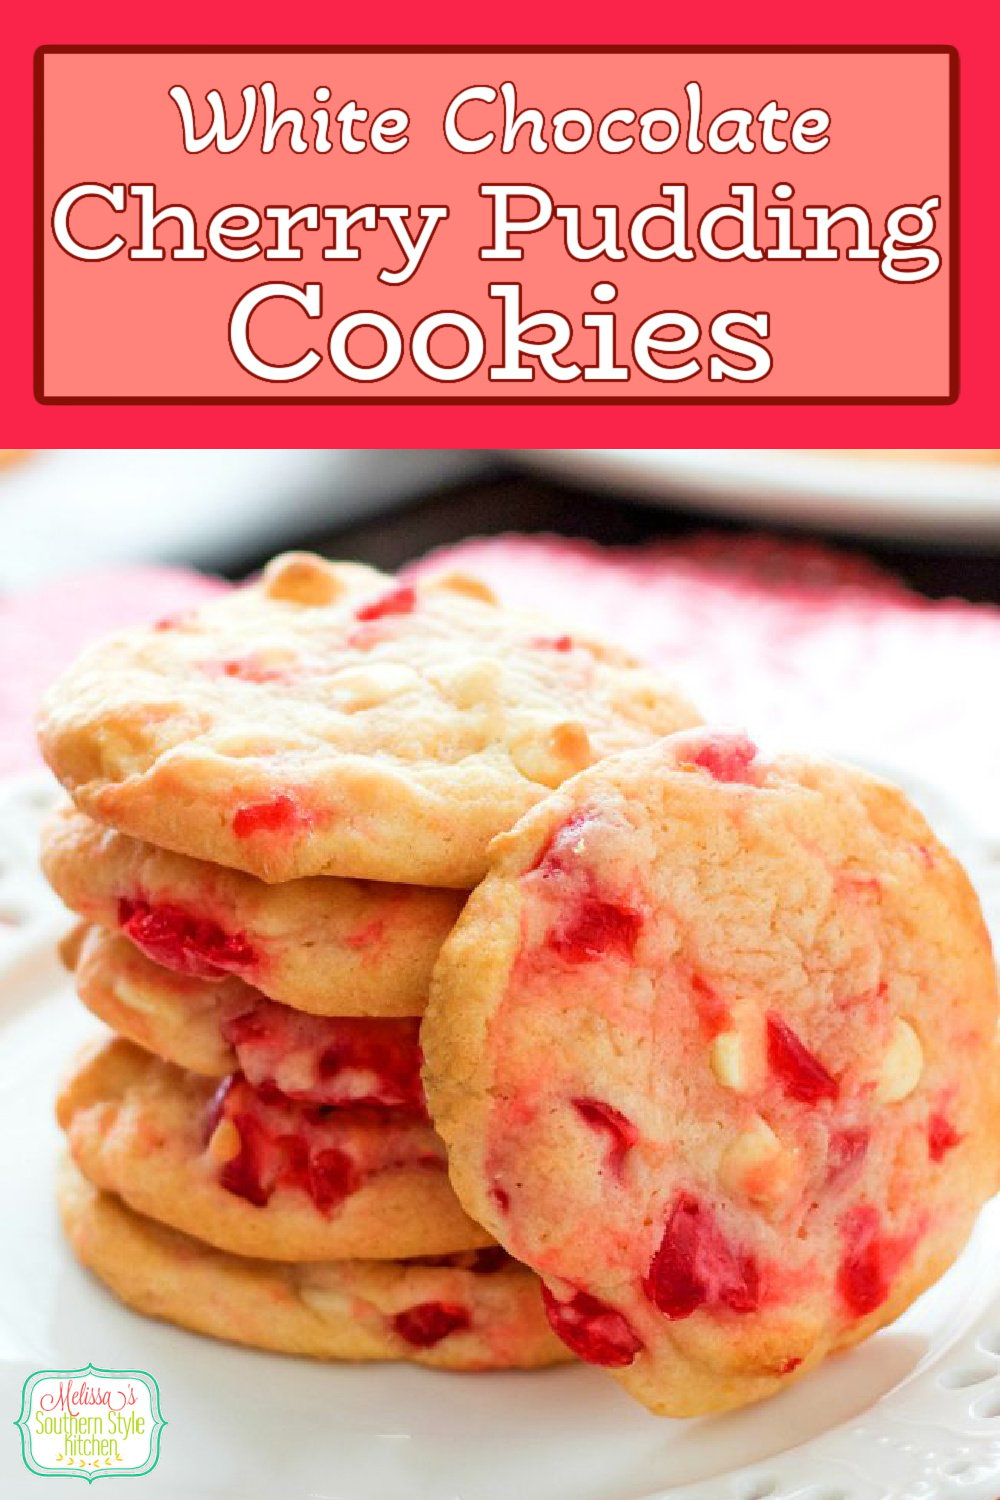 Bake a batch of these irresistible White Chocolate Cherry Pudding Cookies #whitechocolate #cookies #cherrycookioes #maraschinocookies #holidaybaking #desserts #dessertfoodrecipes #southernfood #southernrecipes #cherries via @melissasssk